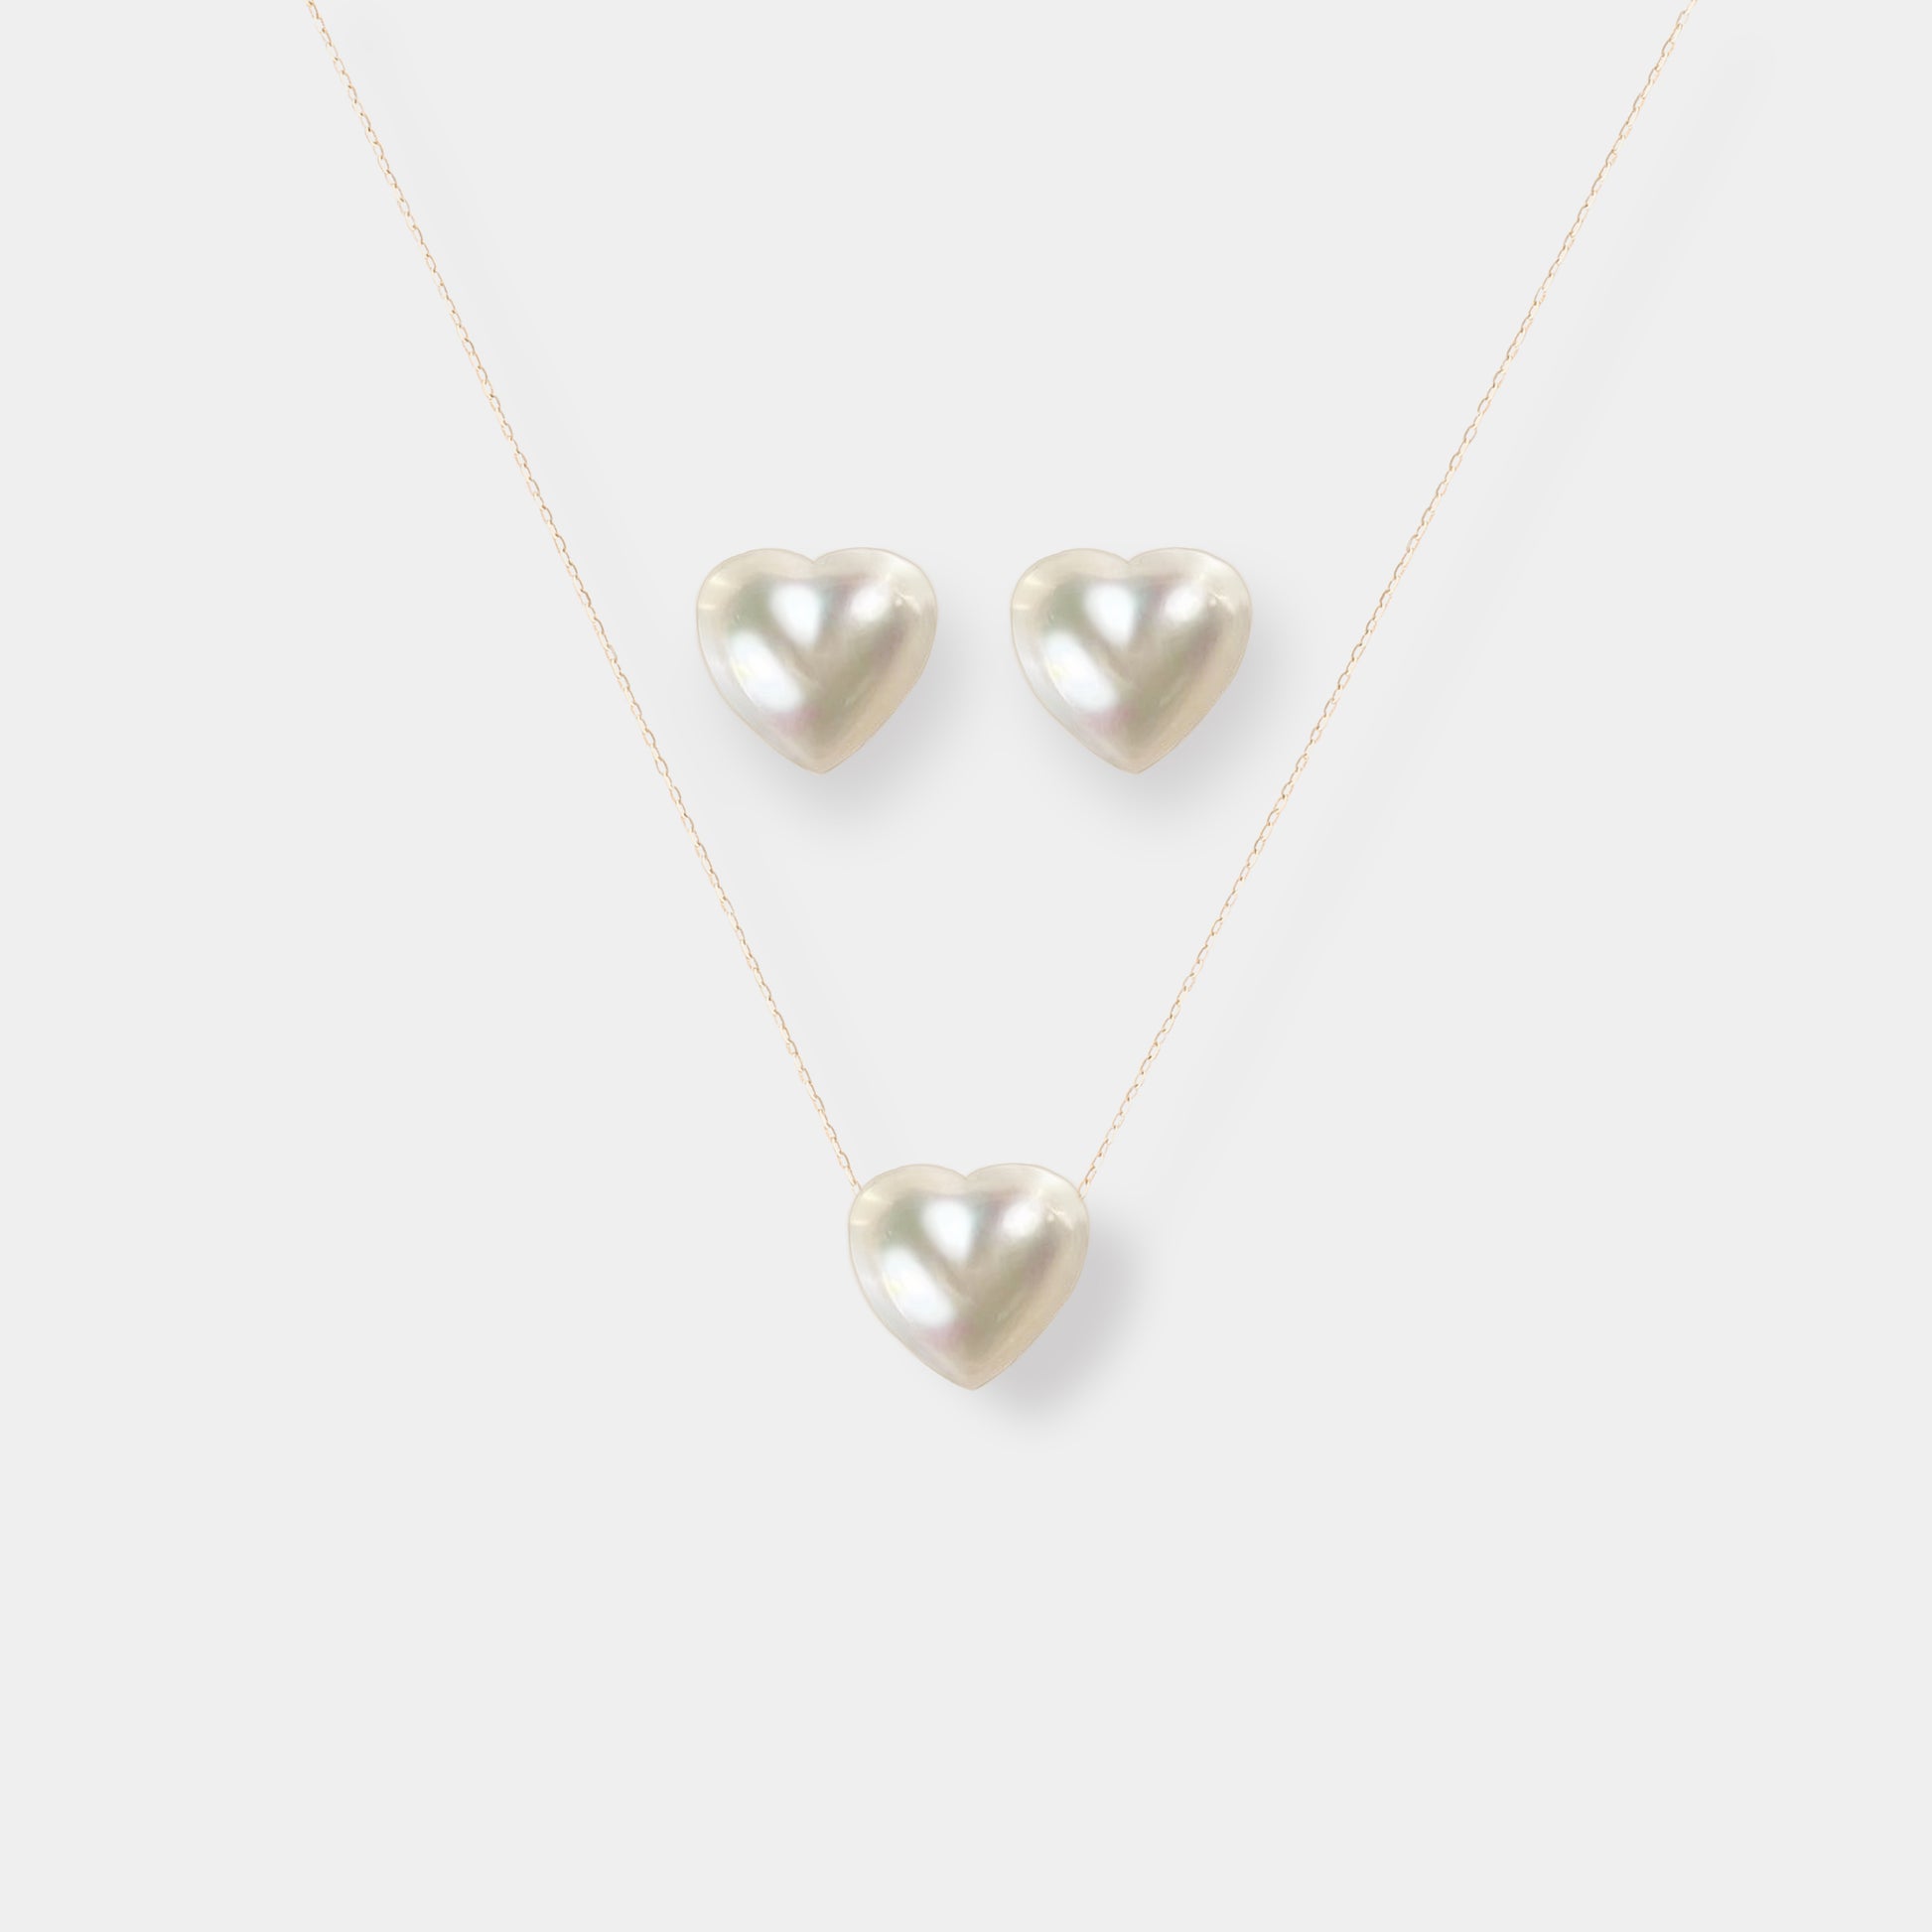 Elevate your style with our Heart Pearl Chain Necklace - a captivating white pearl heart pendant gracefully adorning a golden chain.